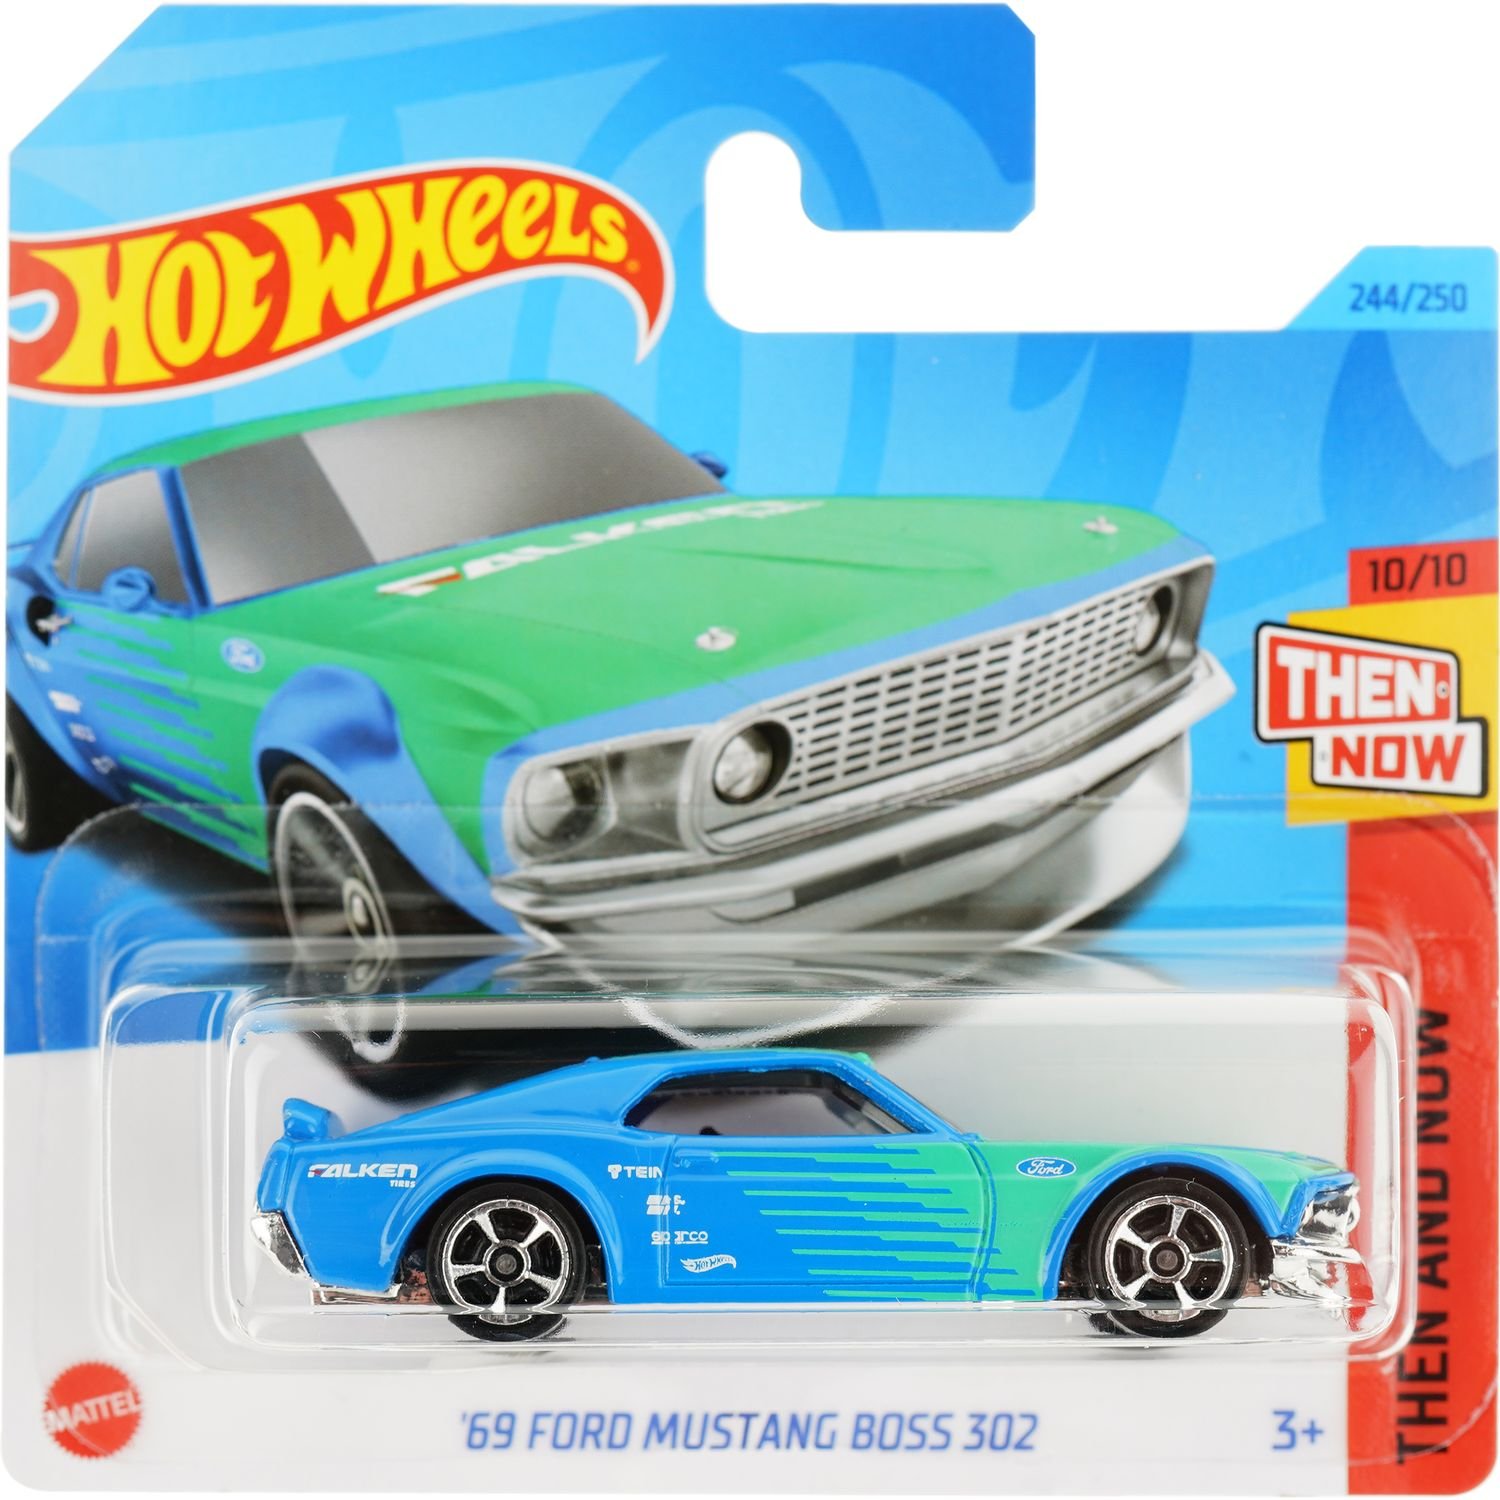 Базовая машинка Hot Wheels Then and Now 69 Ford Mustang Boss 302 голубая (5785) - фото 1